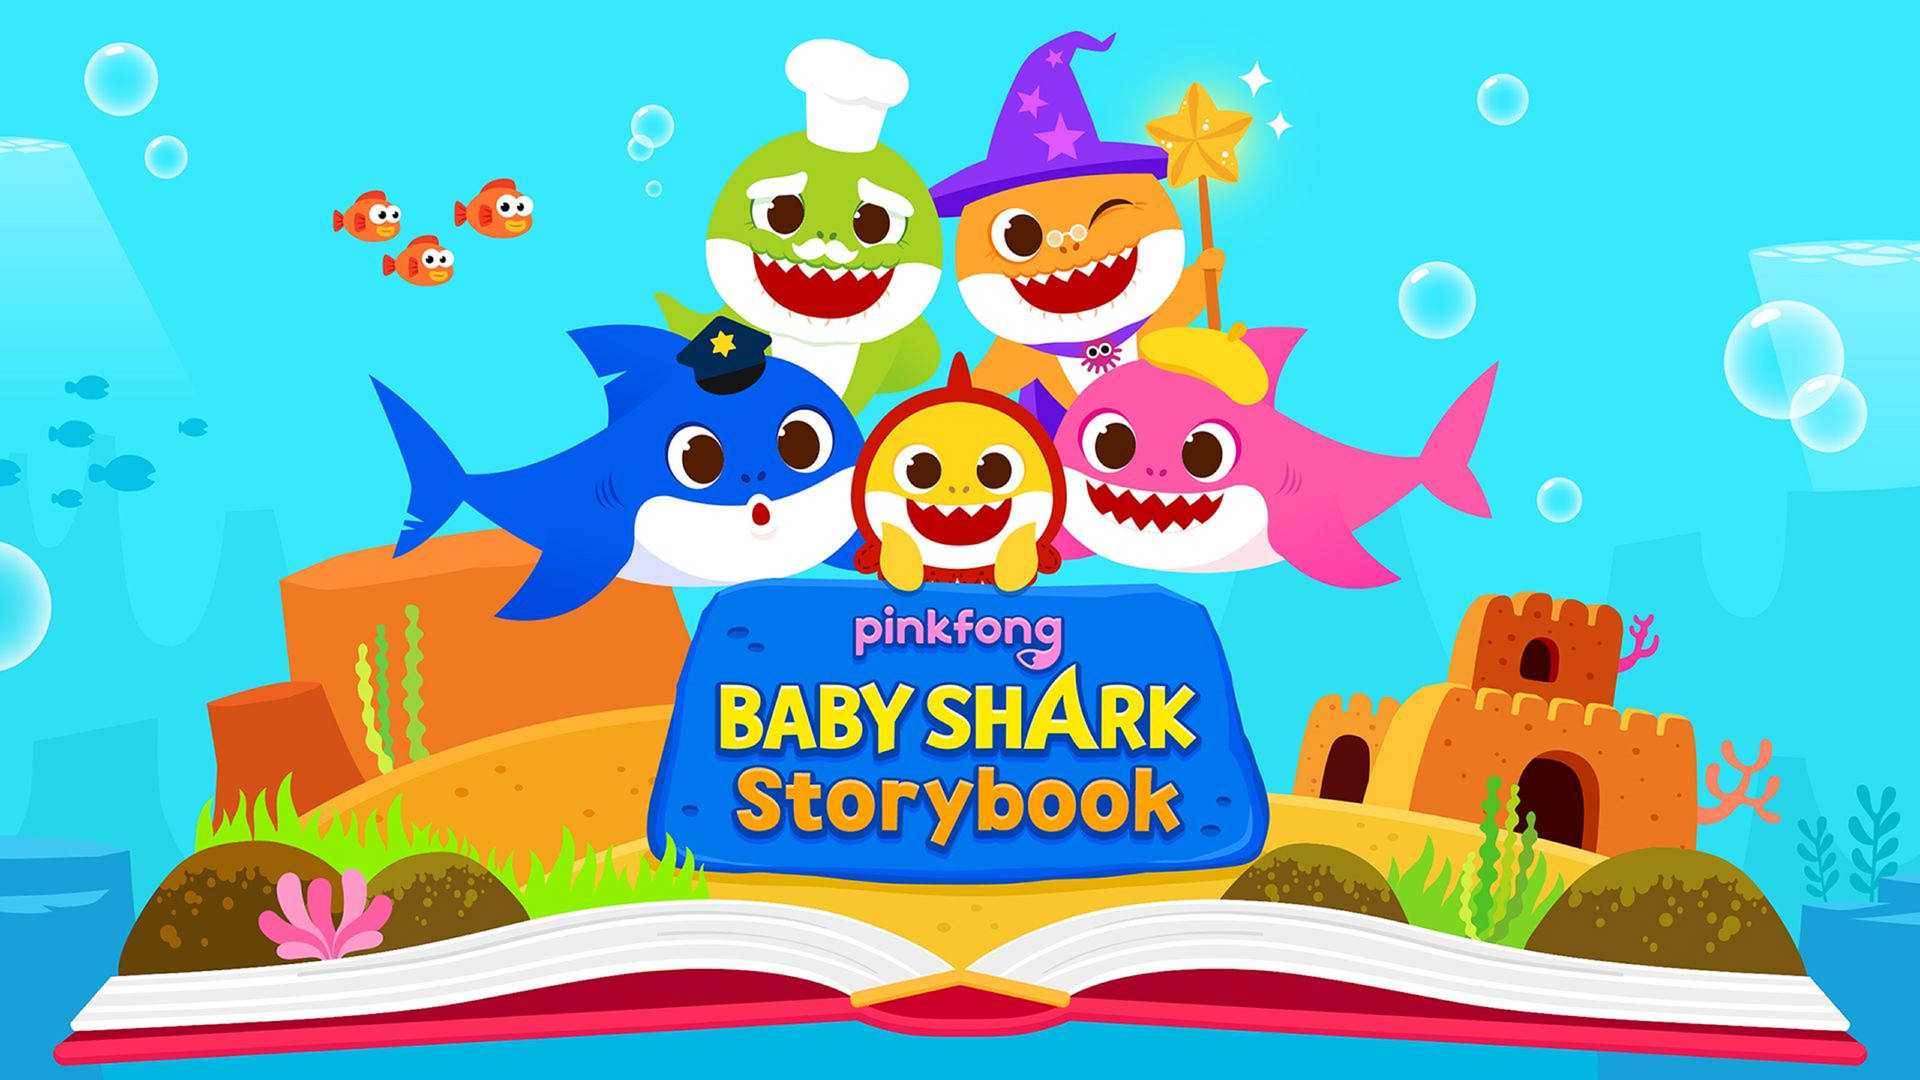 Pinkfong Baby Shark Storybook Background